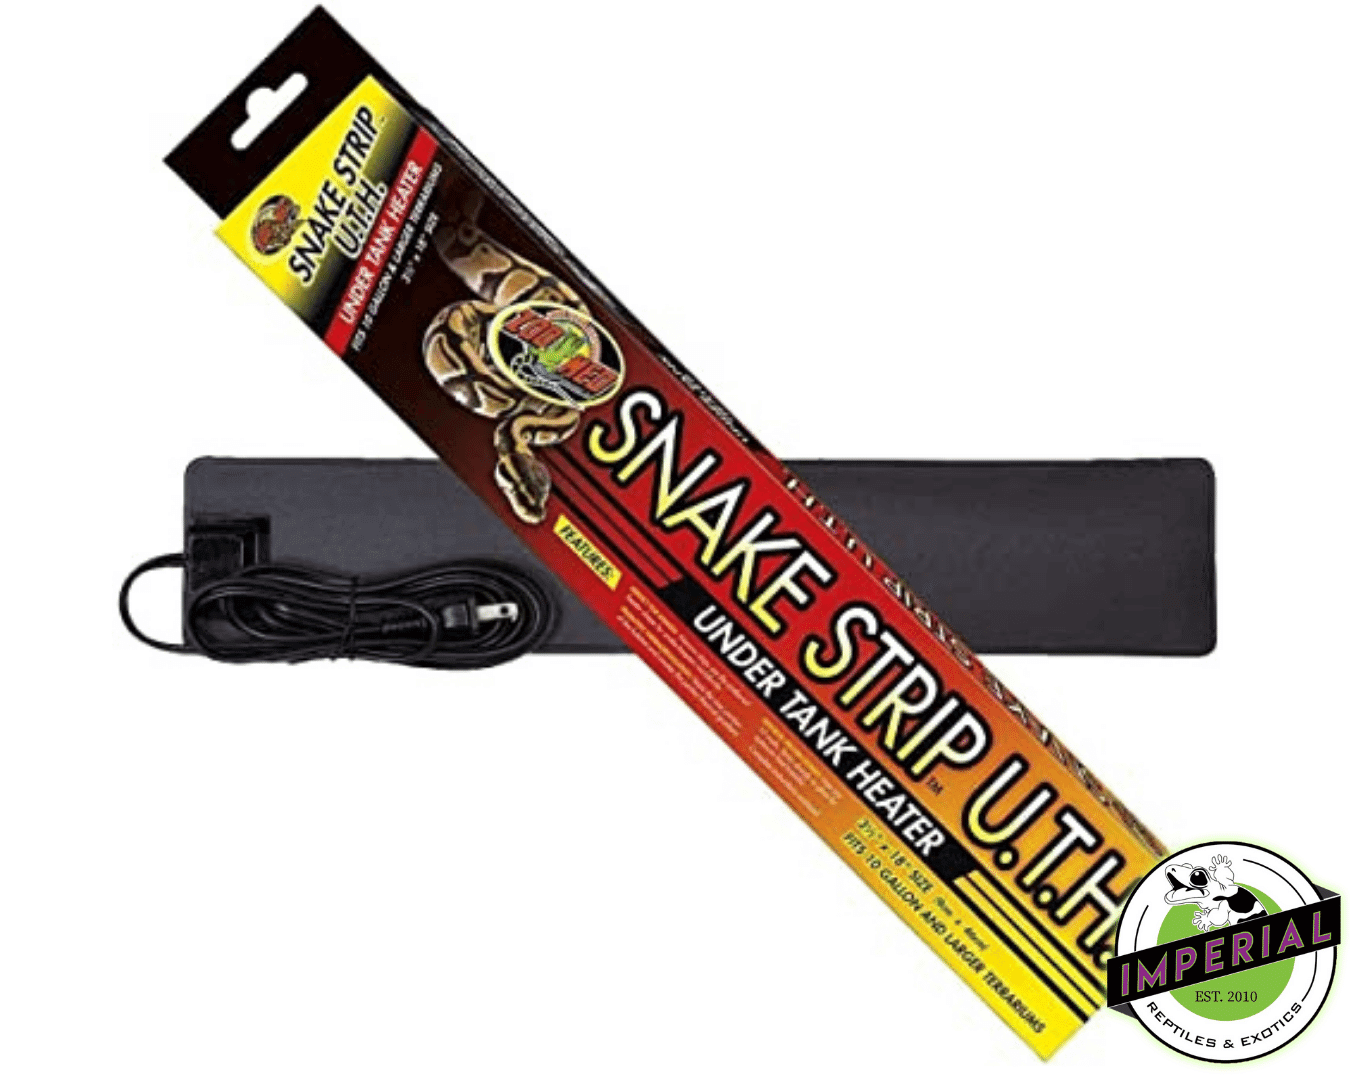 heat mat for sale online, buy reptiles supplies near me at cheap prices